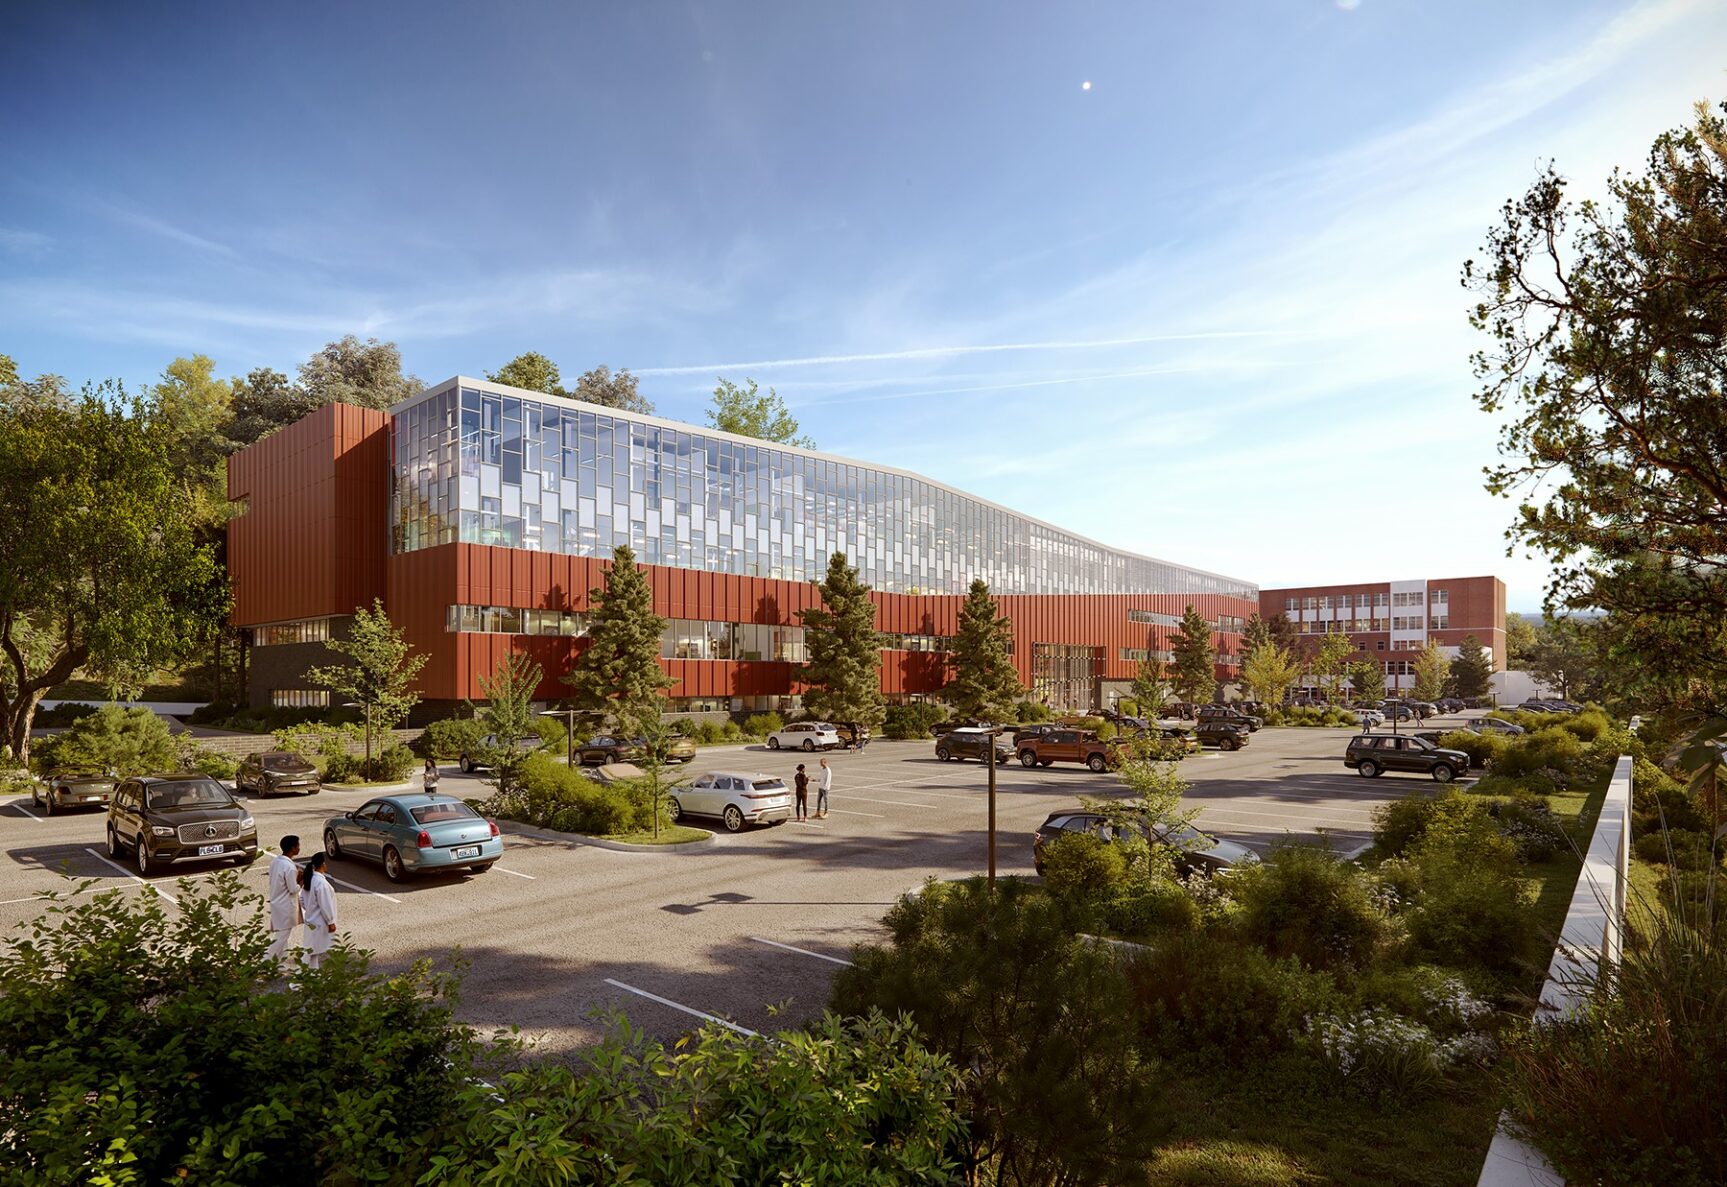 An exterior rendering of the State of Missouri Multi Agency Lab Campus, being built by McCownGordon Construction.